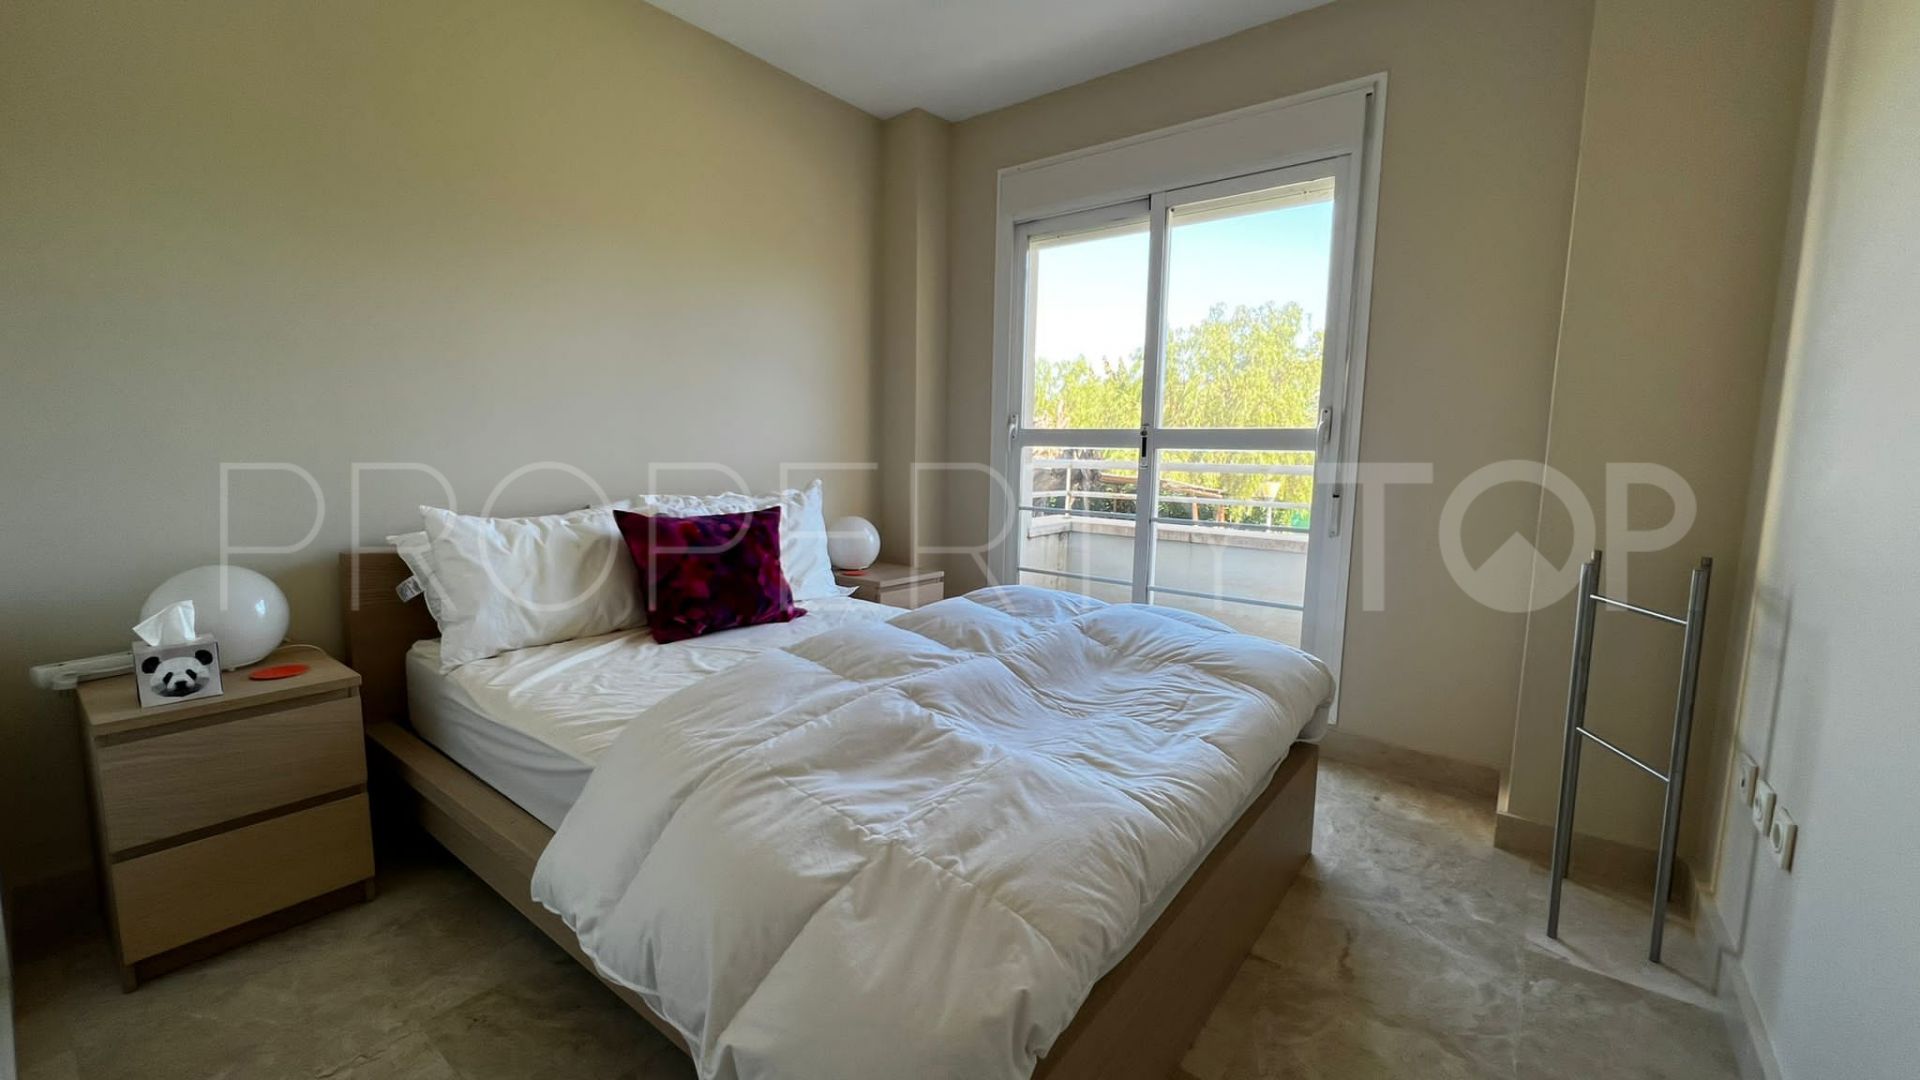 Apartment for sale in Dunas Green with 3 bedrooms